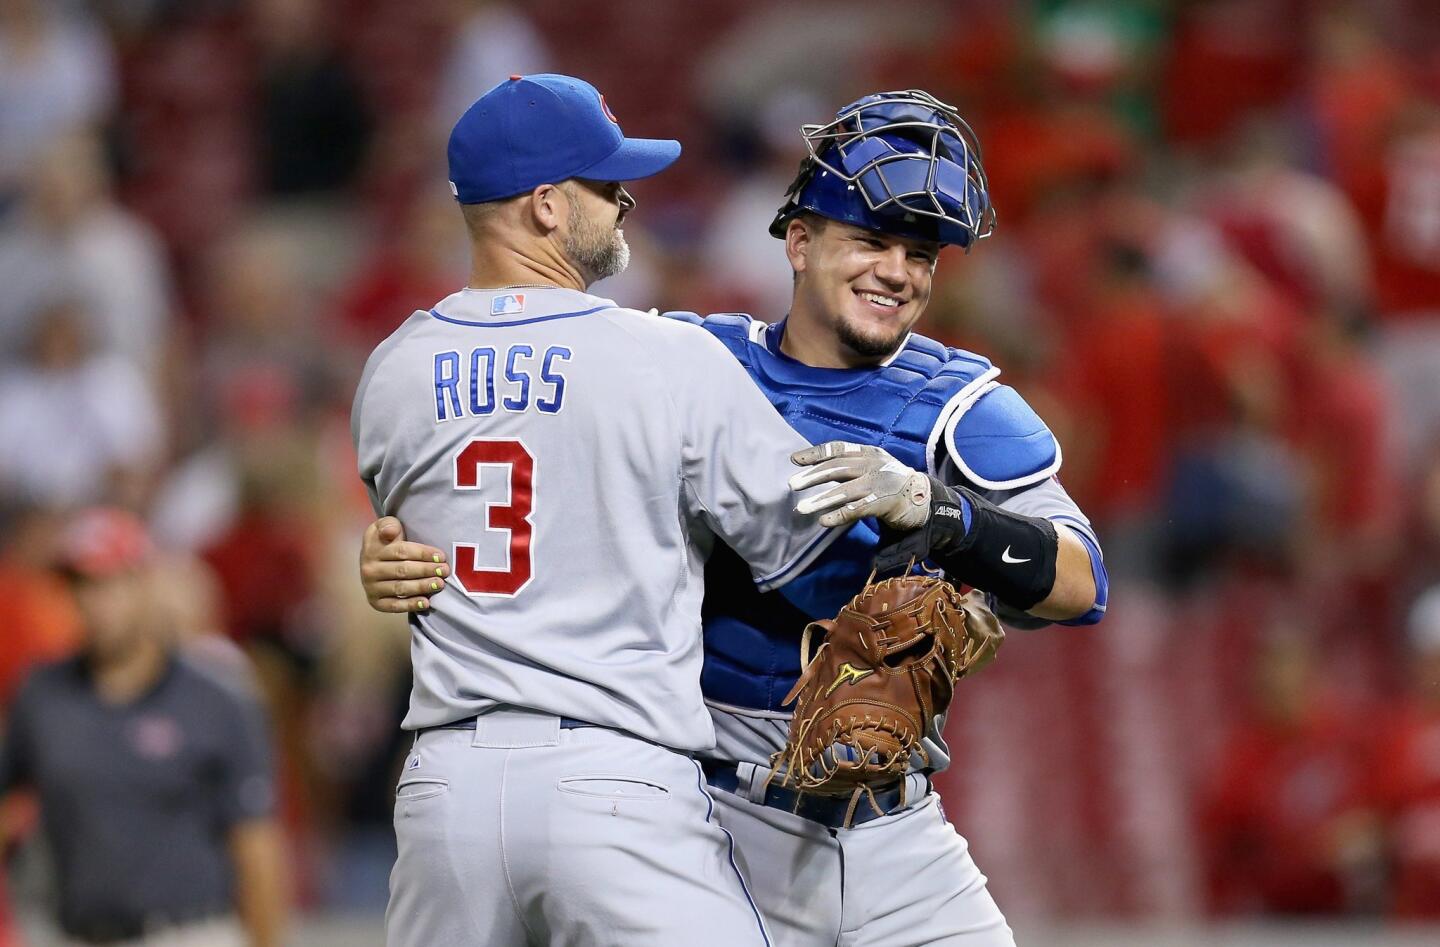 Kyle Schwarber and David Ross celebrate after the 5-4 win.